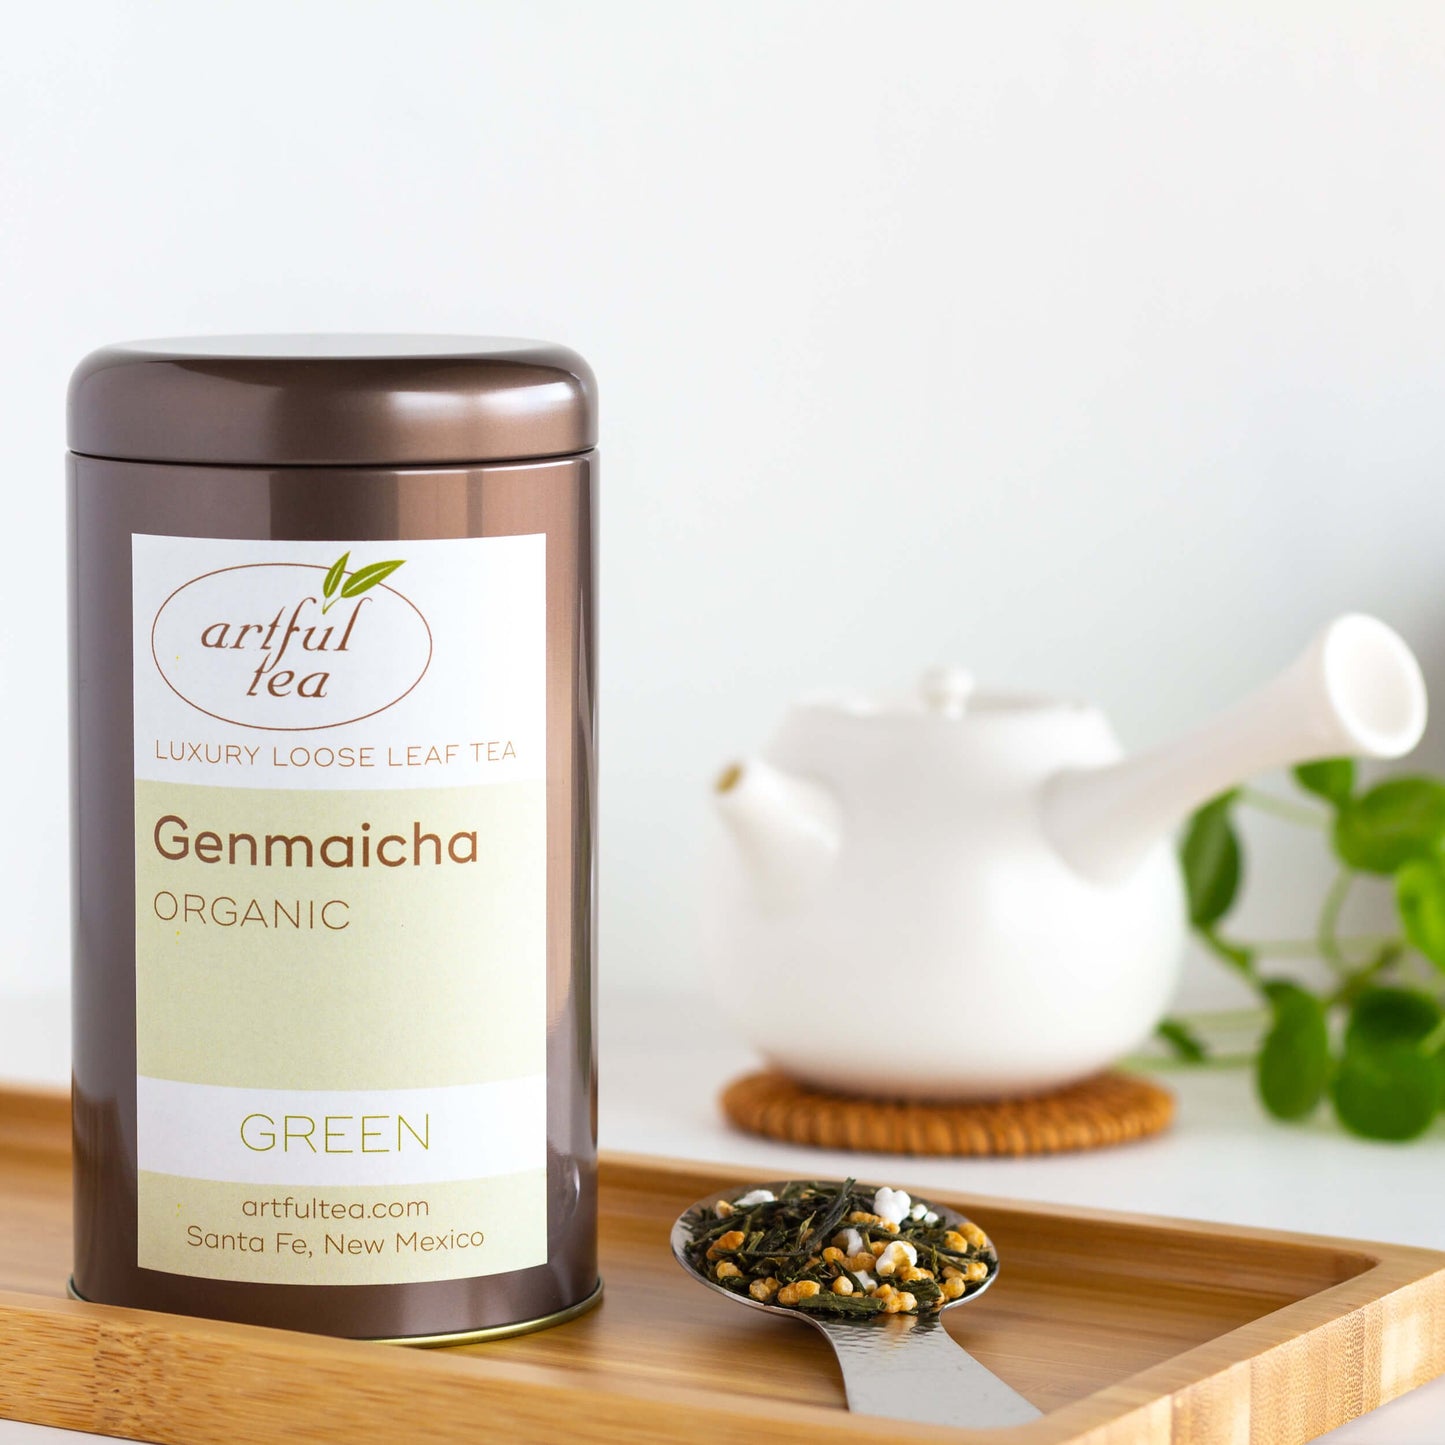 Genmaicha Organic Green Tea shown packaged in a brown tin, displayed on a wooden tray with a scoop of tea leaves nearby. A white teapot is in the background.